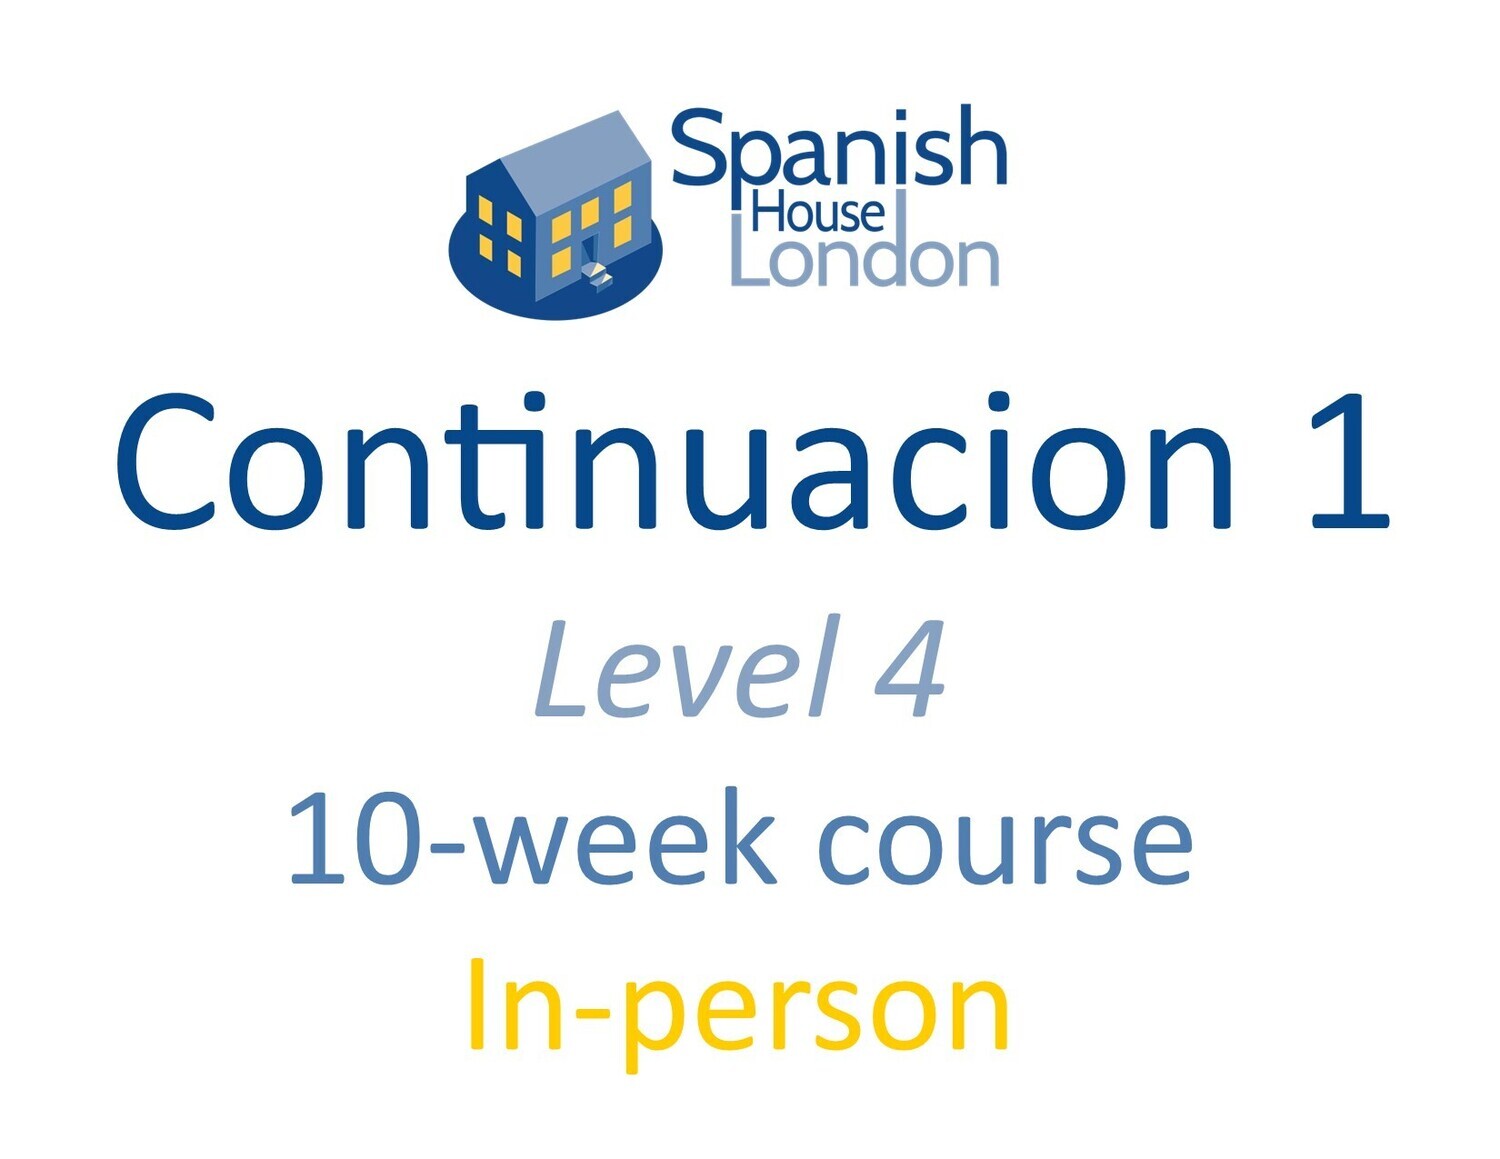 Continuacion 1 Course starting on 11th September at 12pm in Clapham North